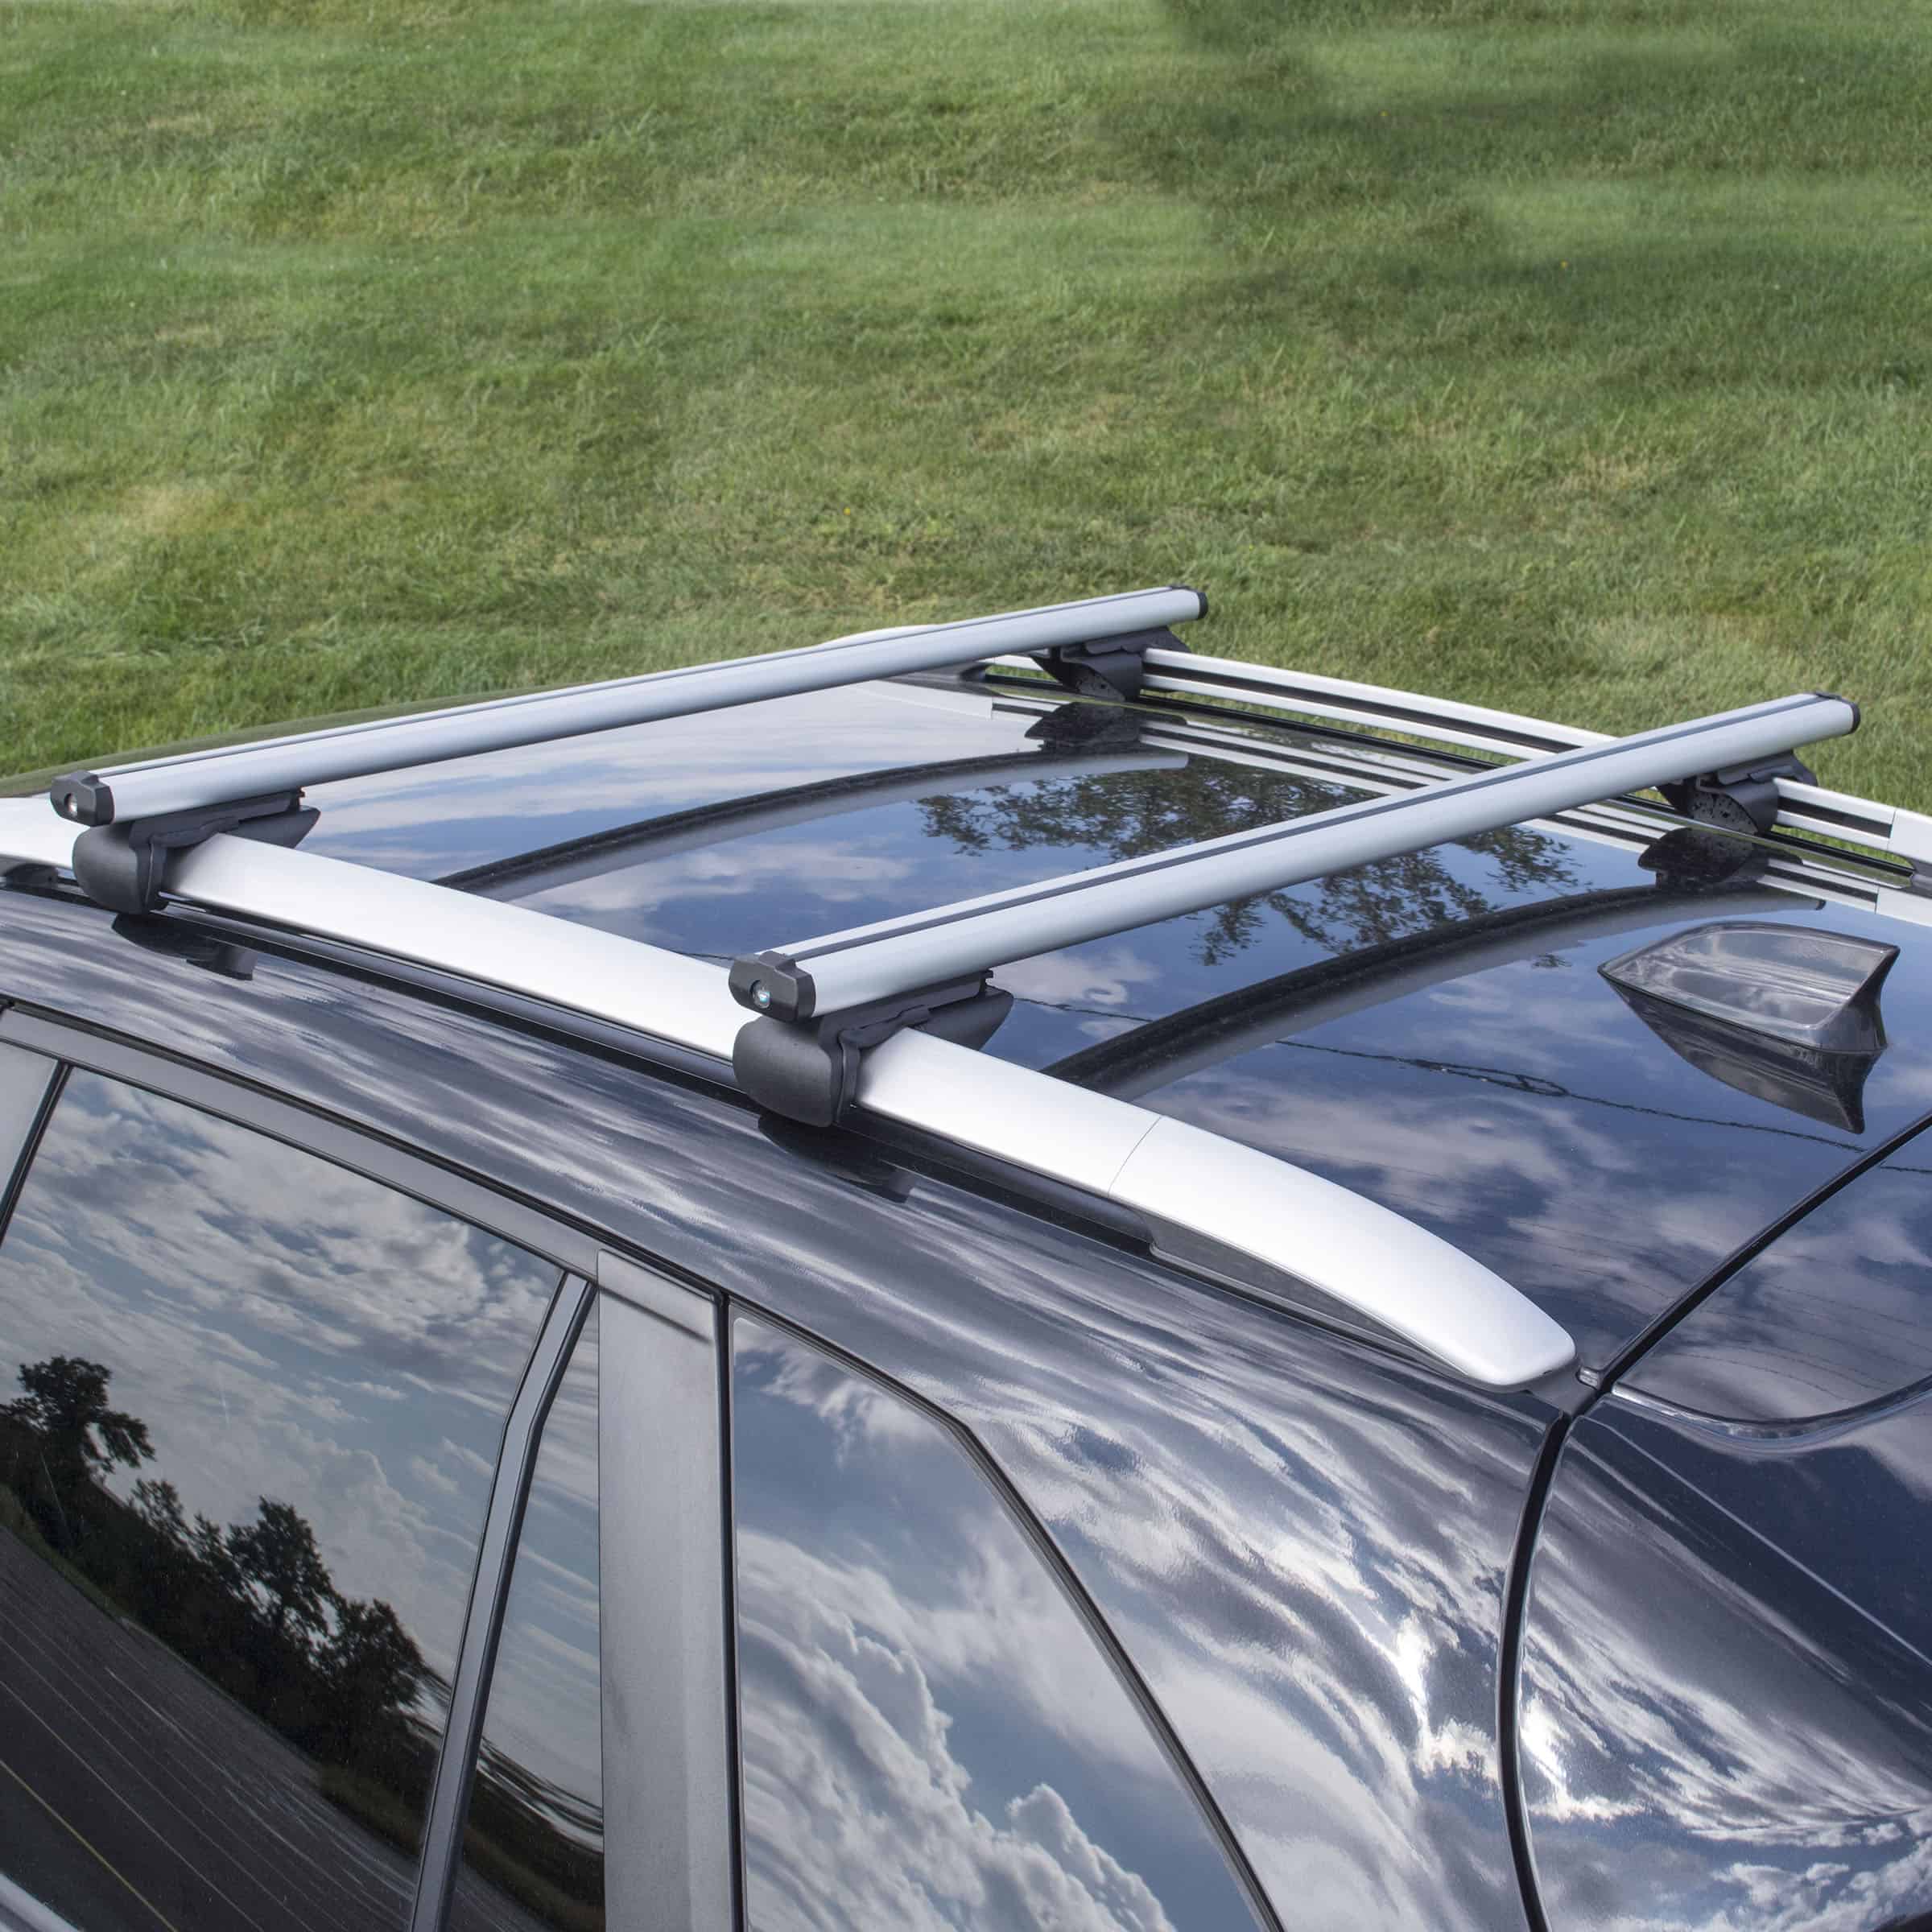 How to Install Roof Rack Crossbars on a Car, Truck, or SUV